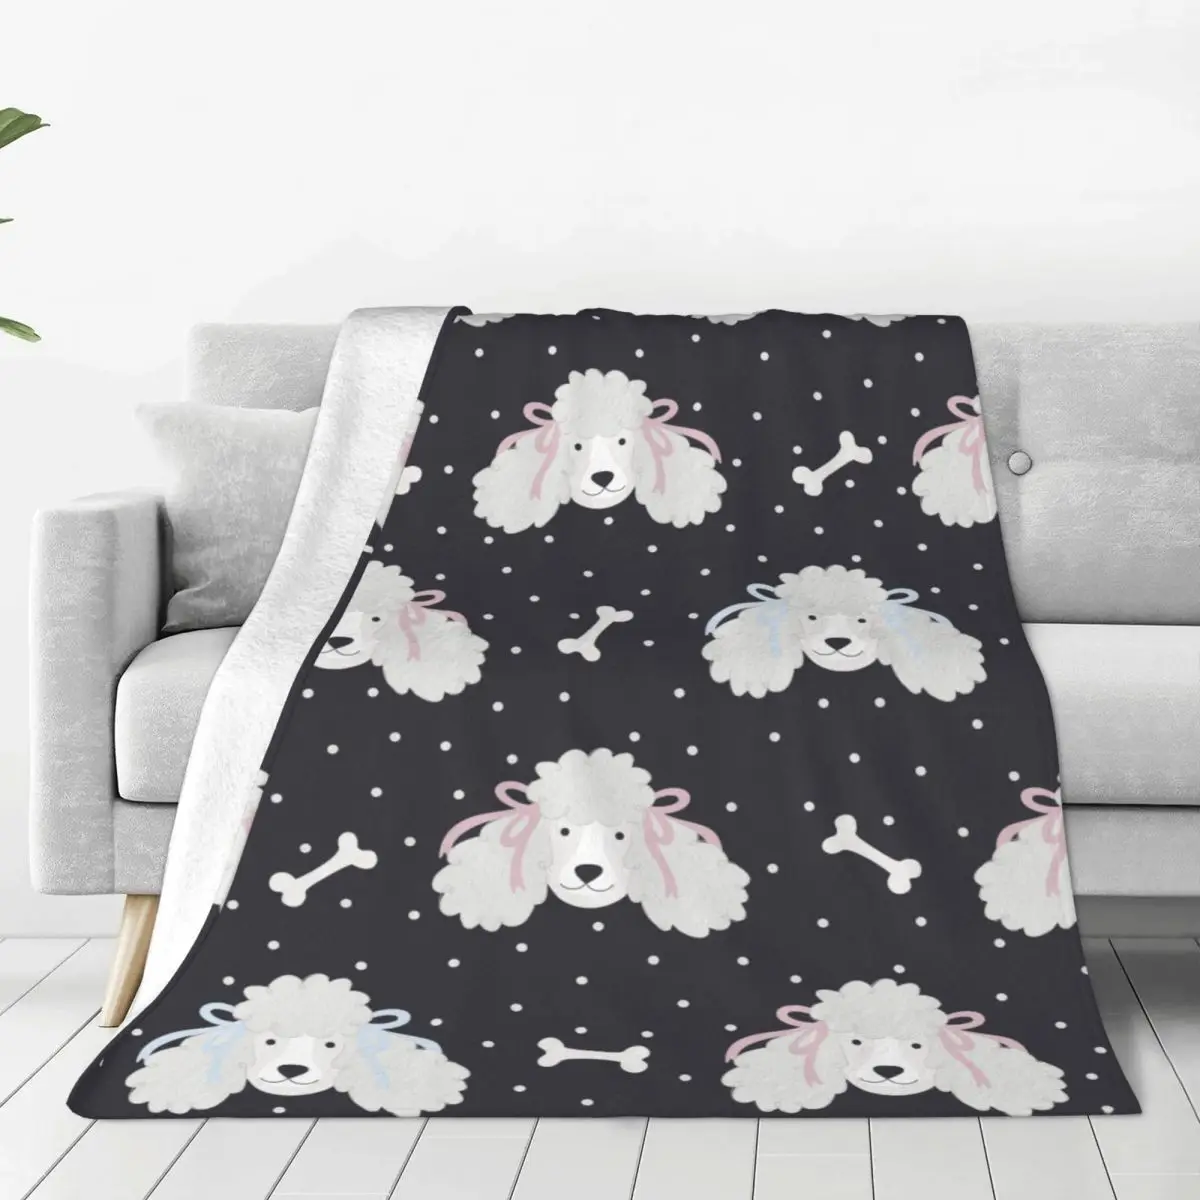 

Cute Poodle With Bones And Polka Dots Blankets Fleece Autumn/Winter Multifunction Soft Throw Blanket for Bedding Office Quilt